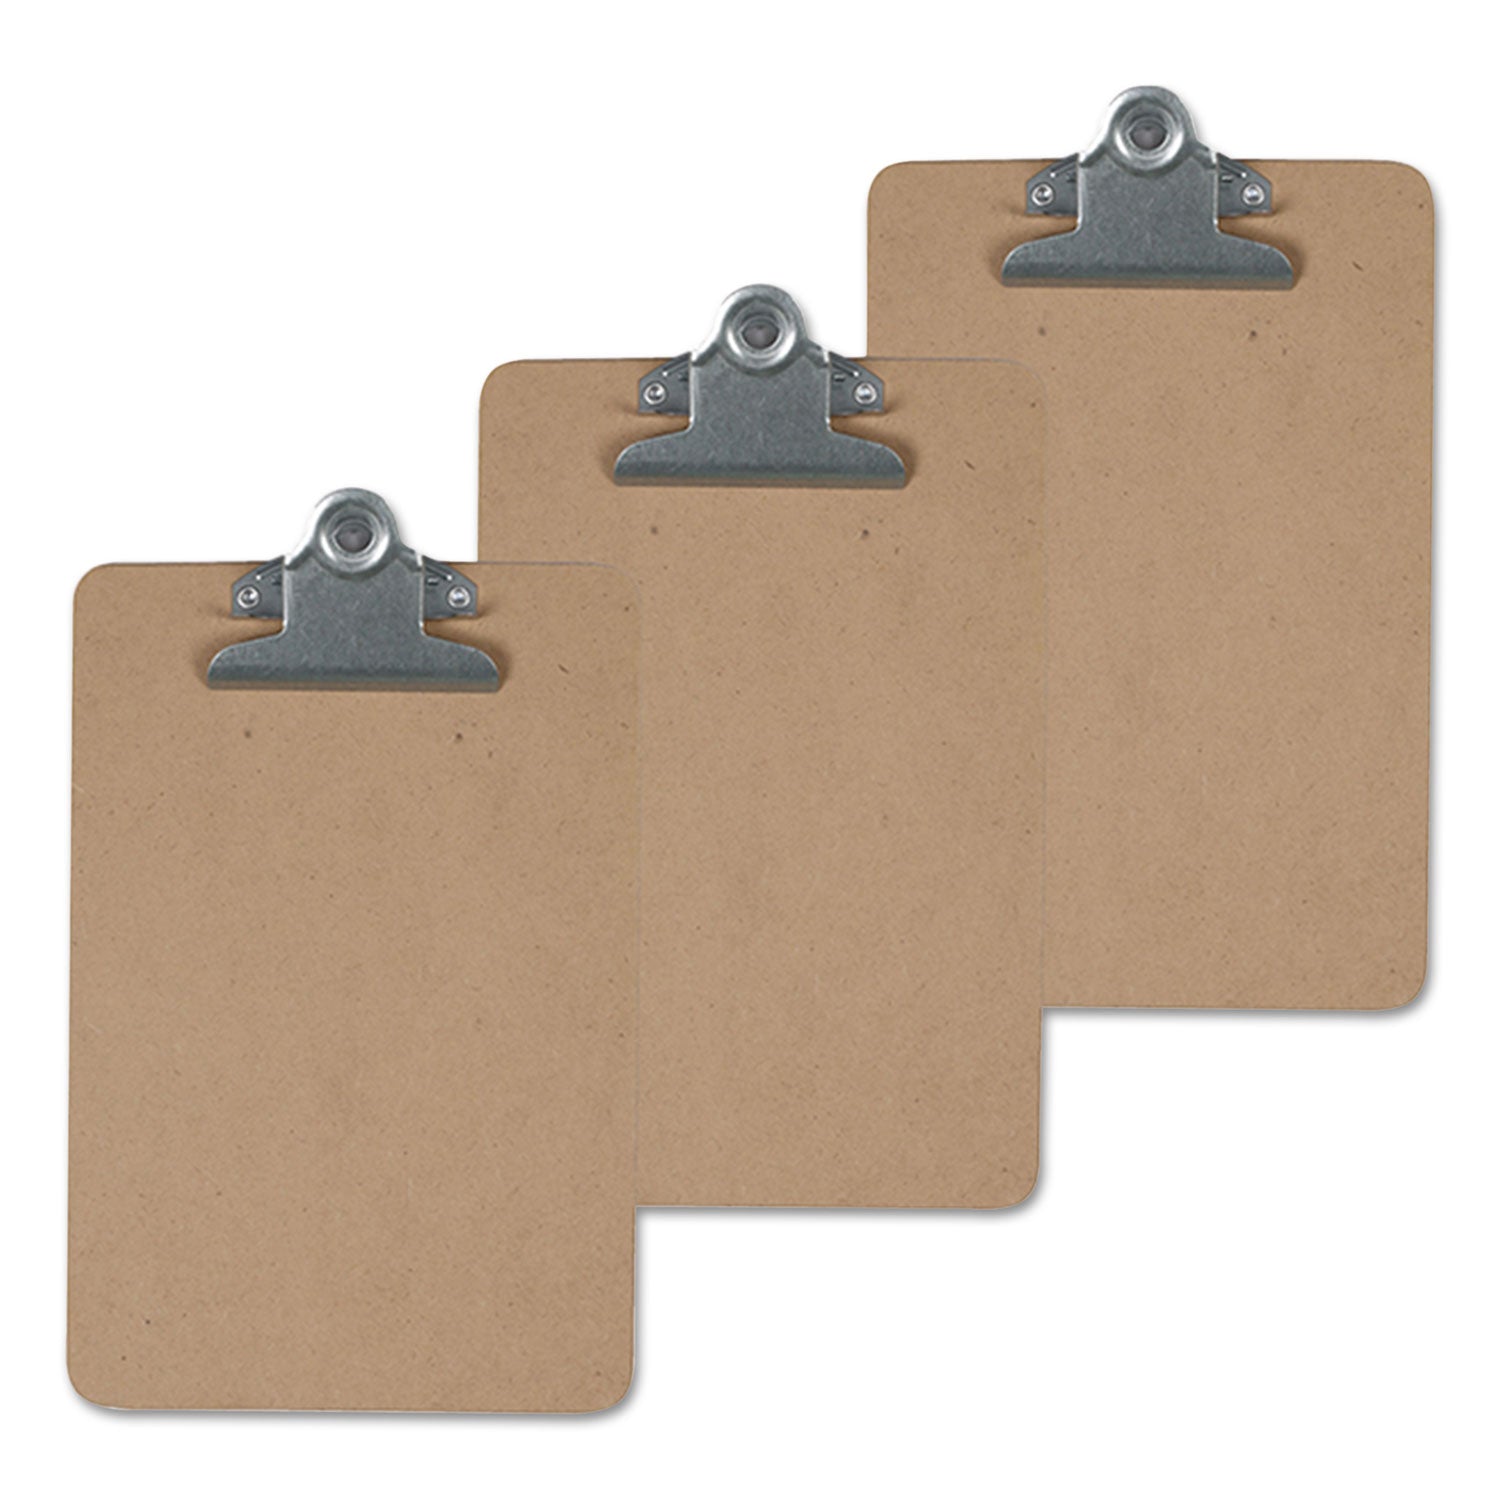 hardboard-clipboard-125-clip-capacity-holds-85-x-14-sheets-brown-3-pack_unv40305vp - 1